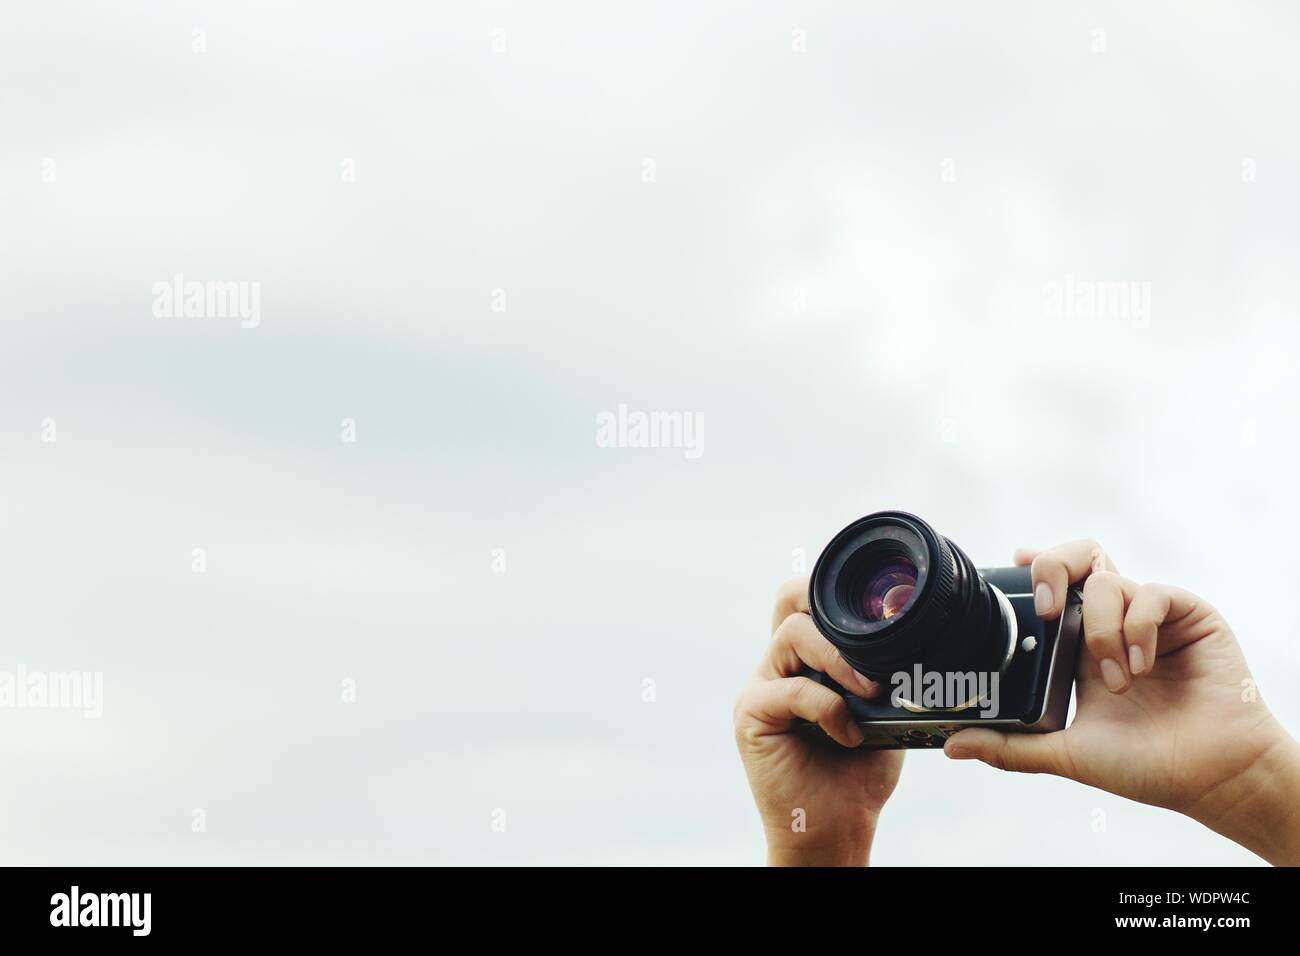 Low Angle View Of Person Photographing With Digital Camera Against Sky Stock Photo